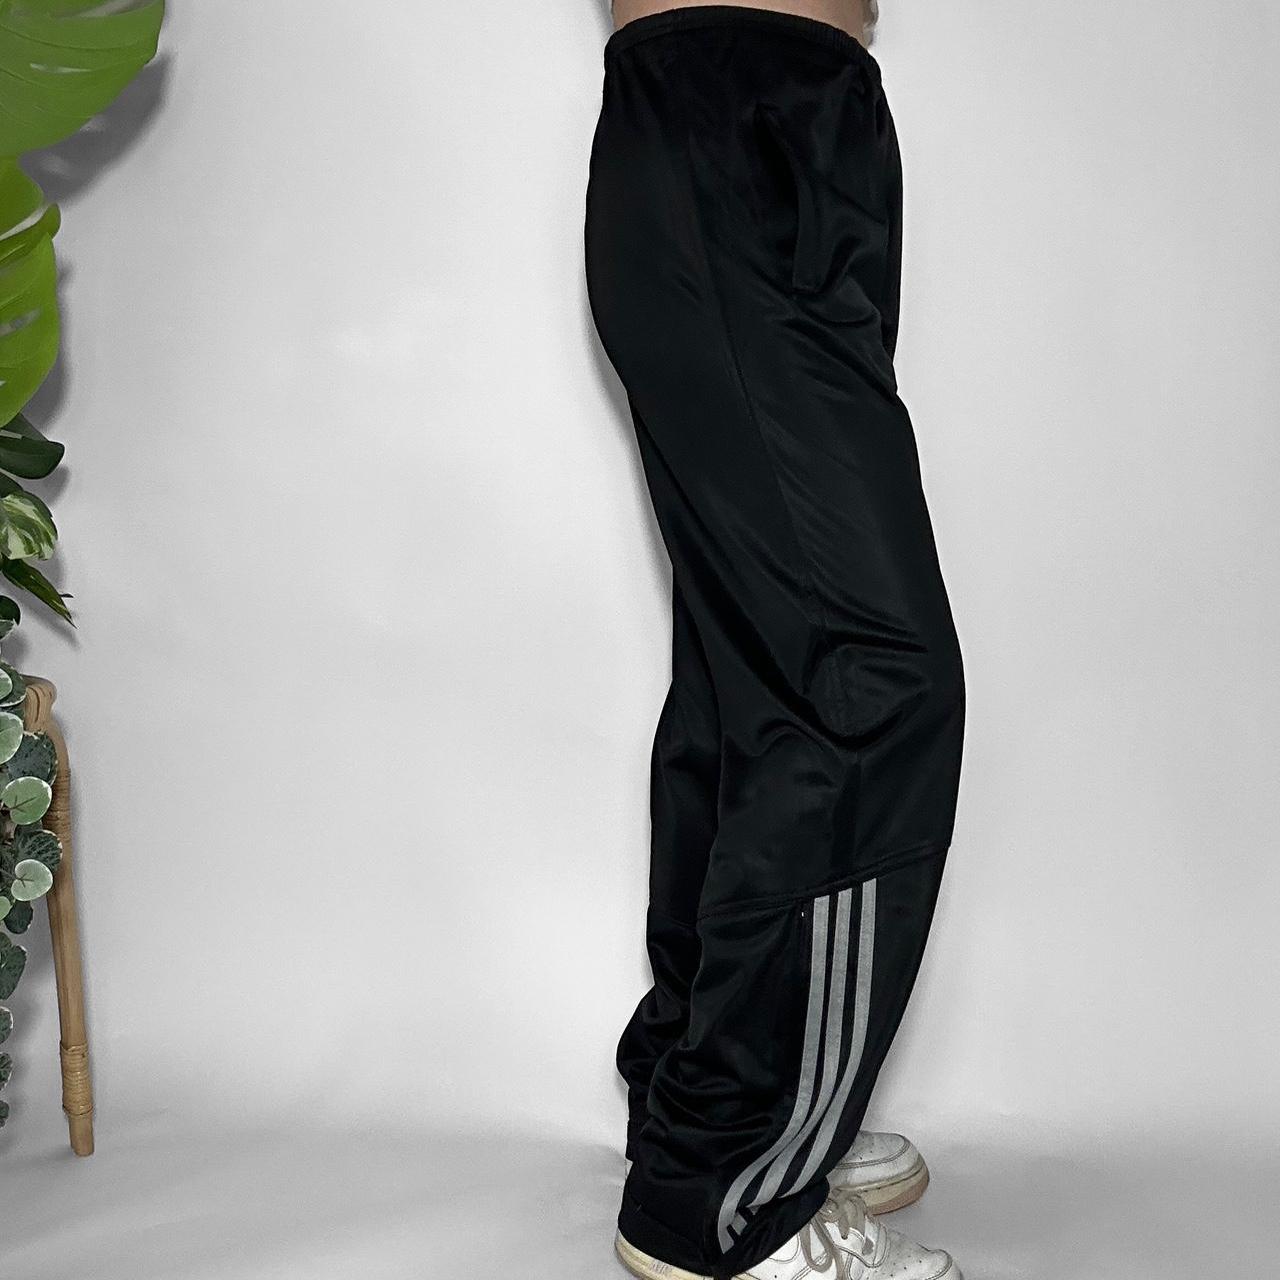 Vintage 90's Adidas Sporty Black Baggy Track Pants with Toggle